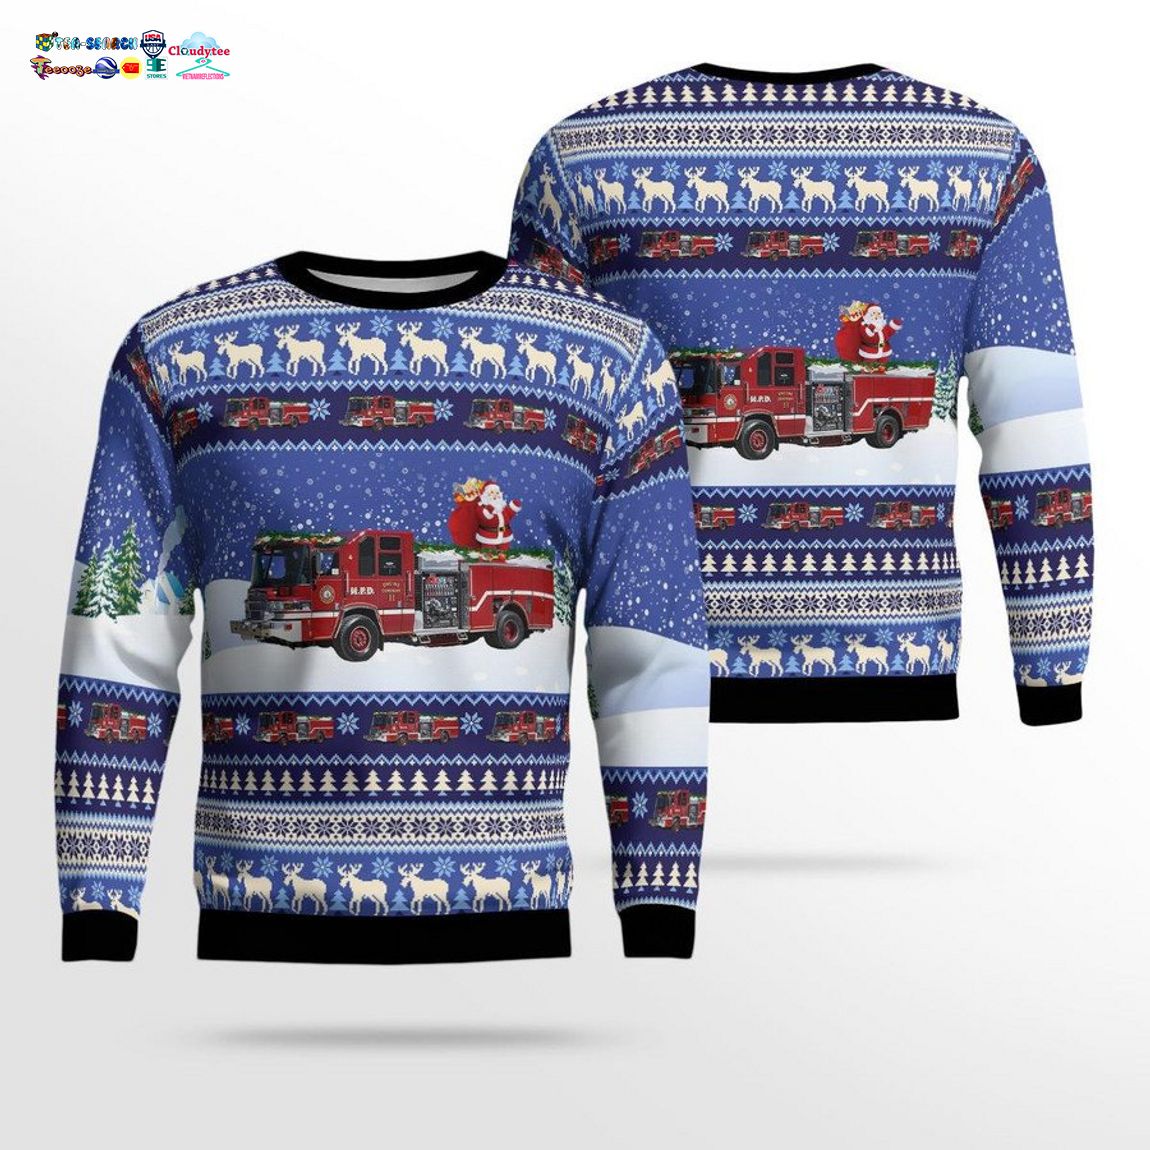 wisconsin-city-of-madison-fire-department-3d-christmas-sweater-1-1eli3.jpg